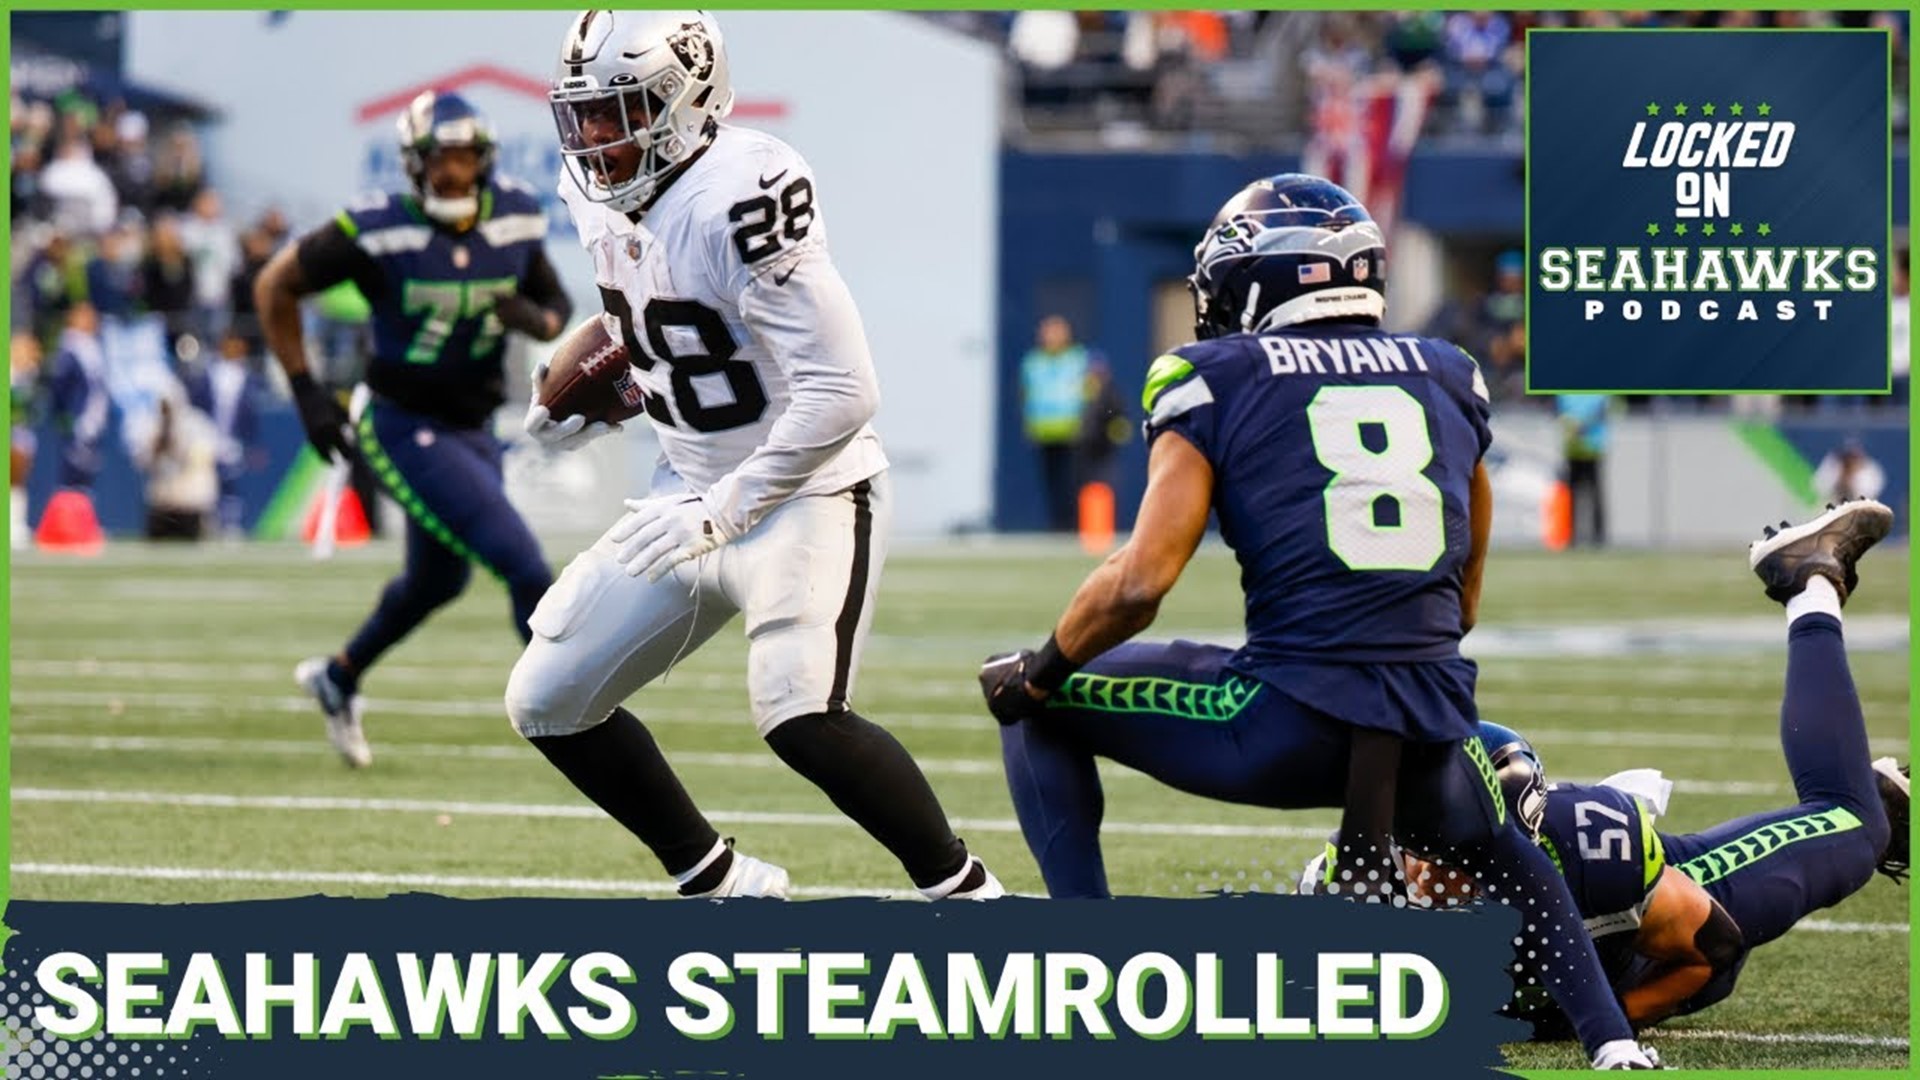 Coming out flat after a bye week, the Seahawks were done in by self-inflicted mistakes on offense and a porous run defense that led to a frustrating 40-34 loss.